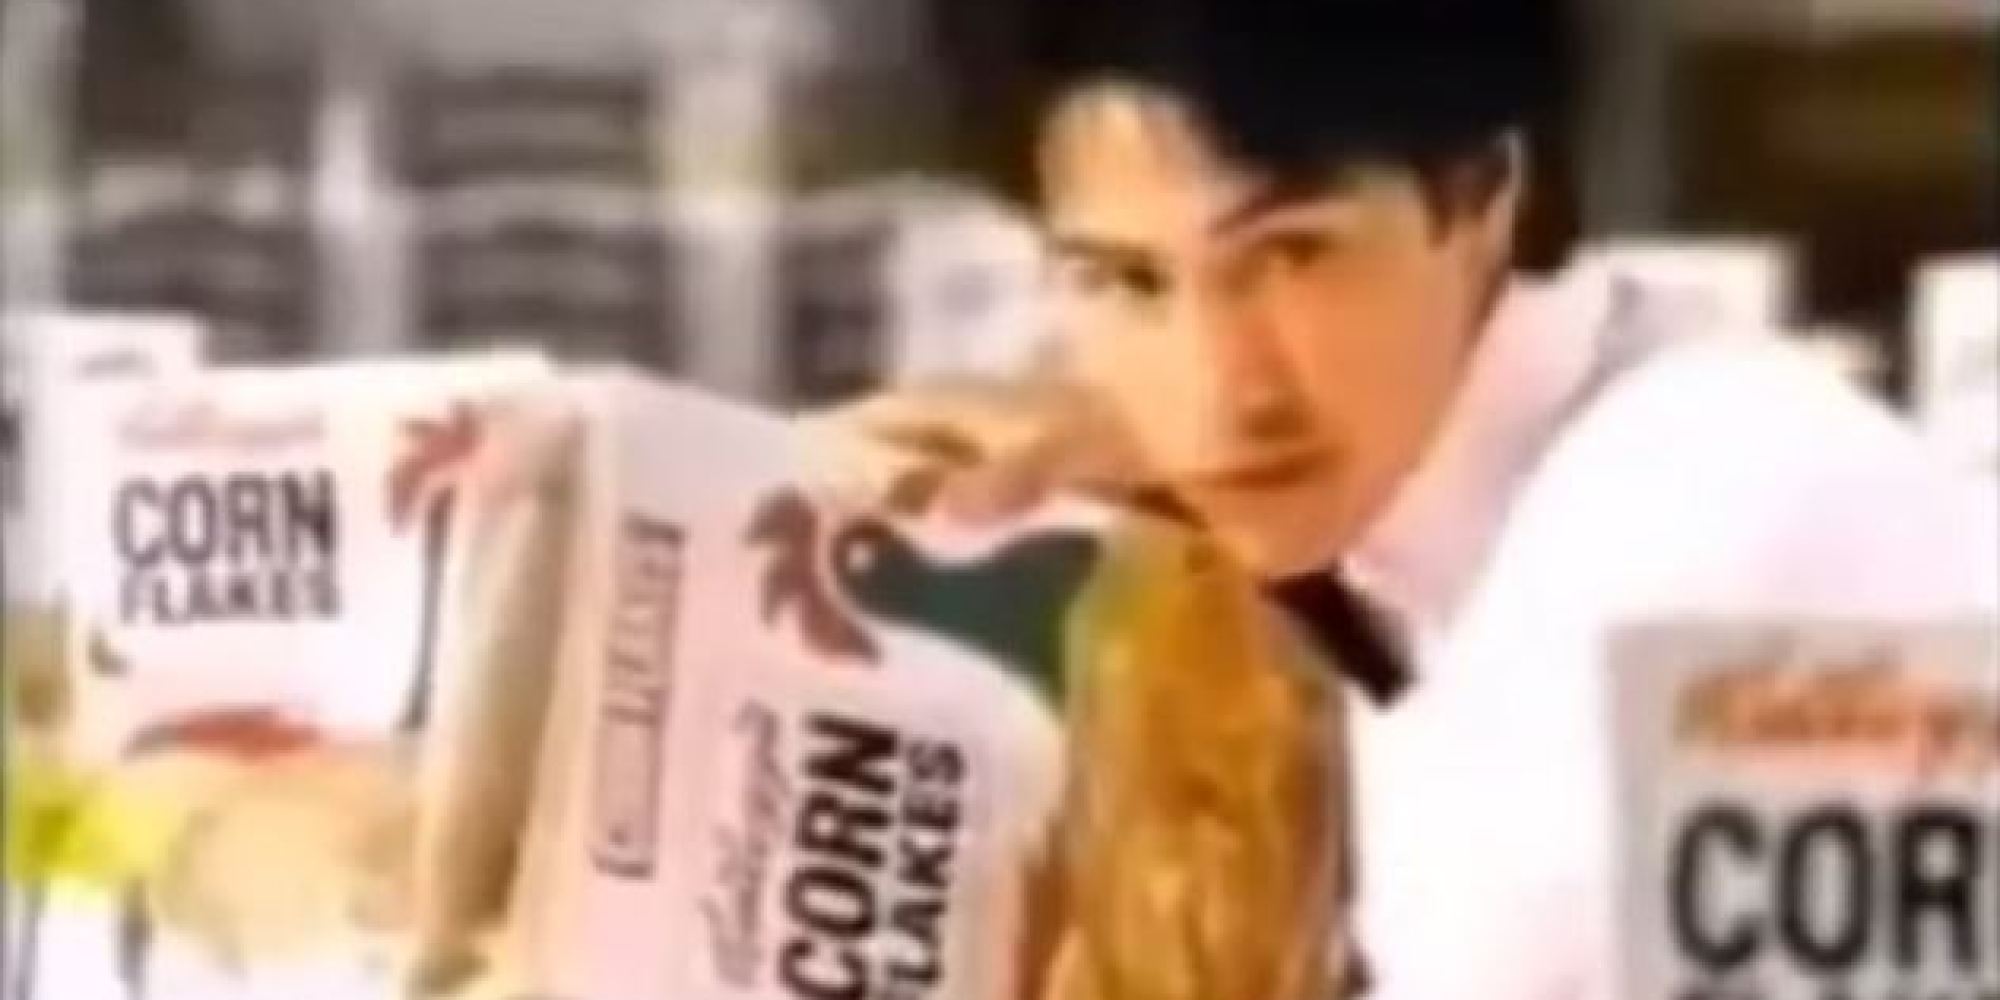 Celebrity Child Actors: Keanu Reeves Got His Start In These Canadian Commercials2000 x 1000